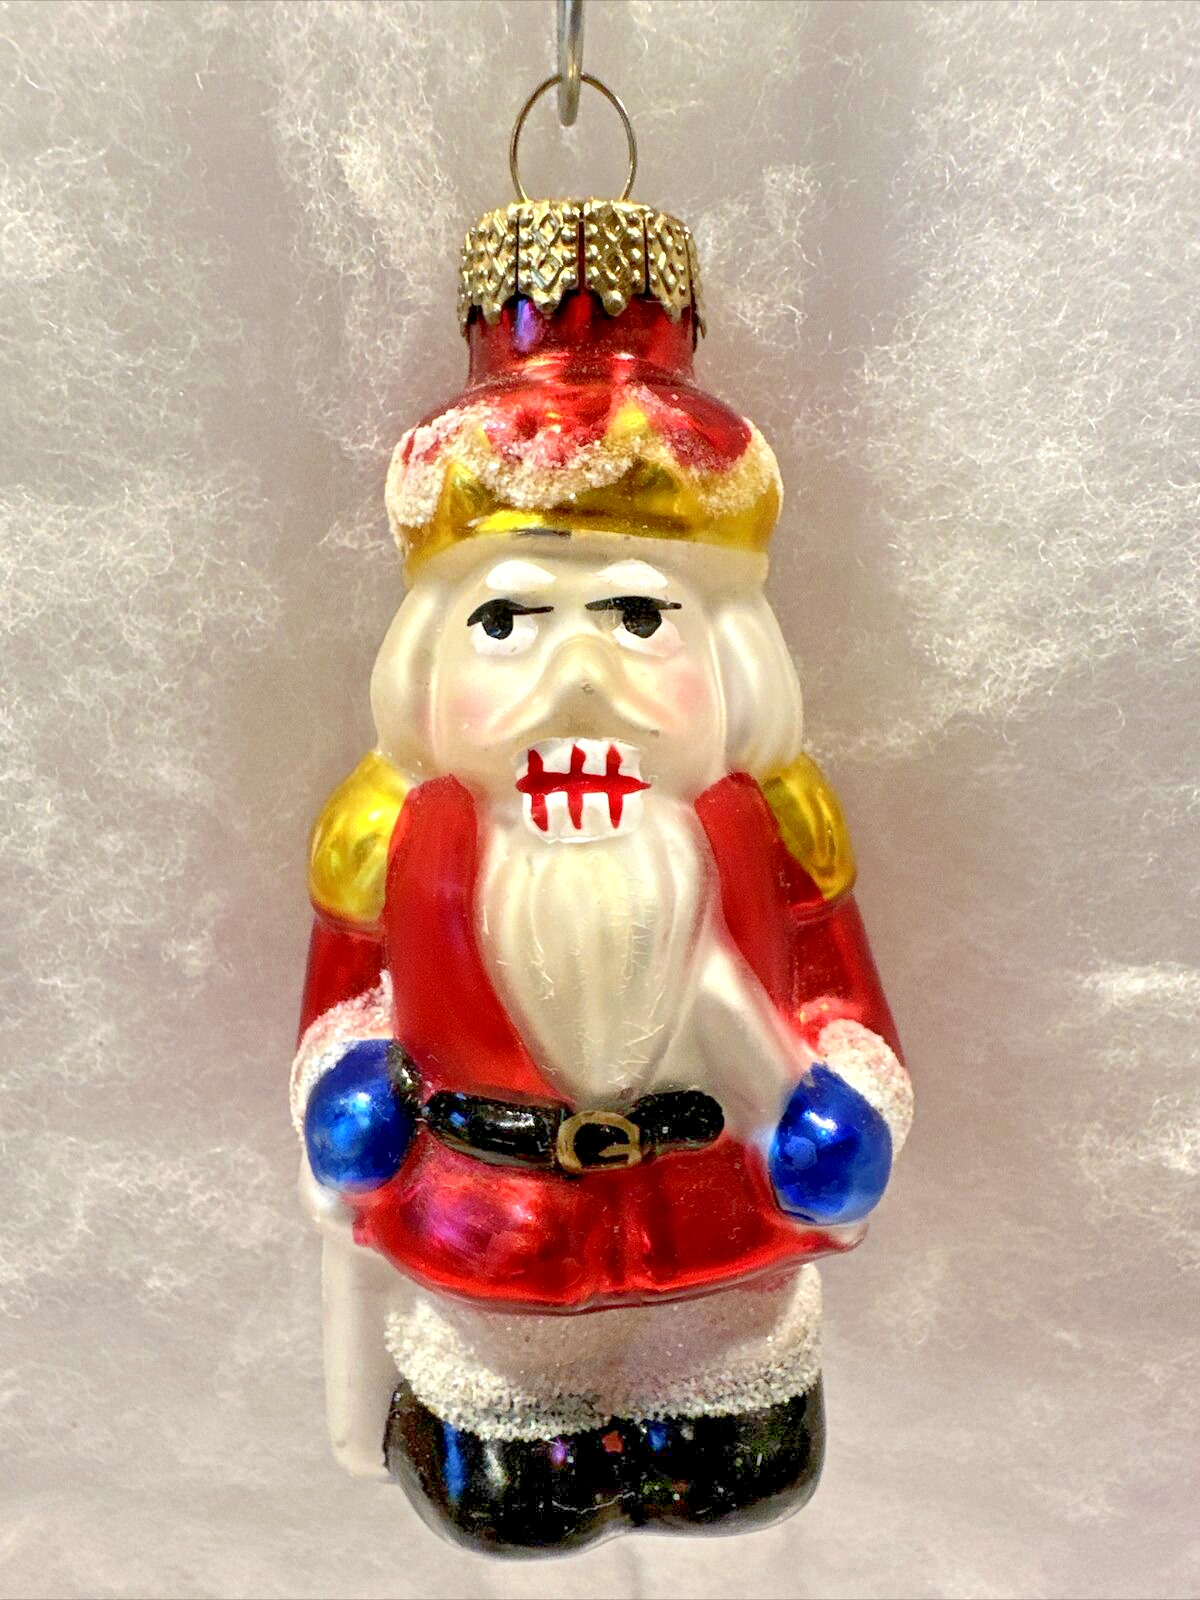 Vintage Angry Santa Claus Blown Glass with Mica Glitter Christmas Ornament 3.5”